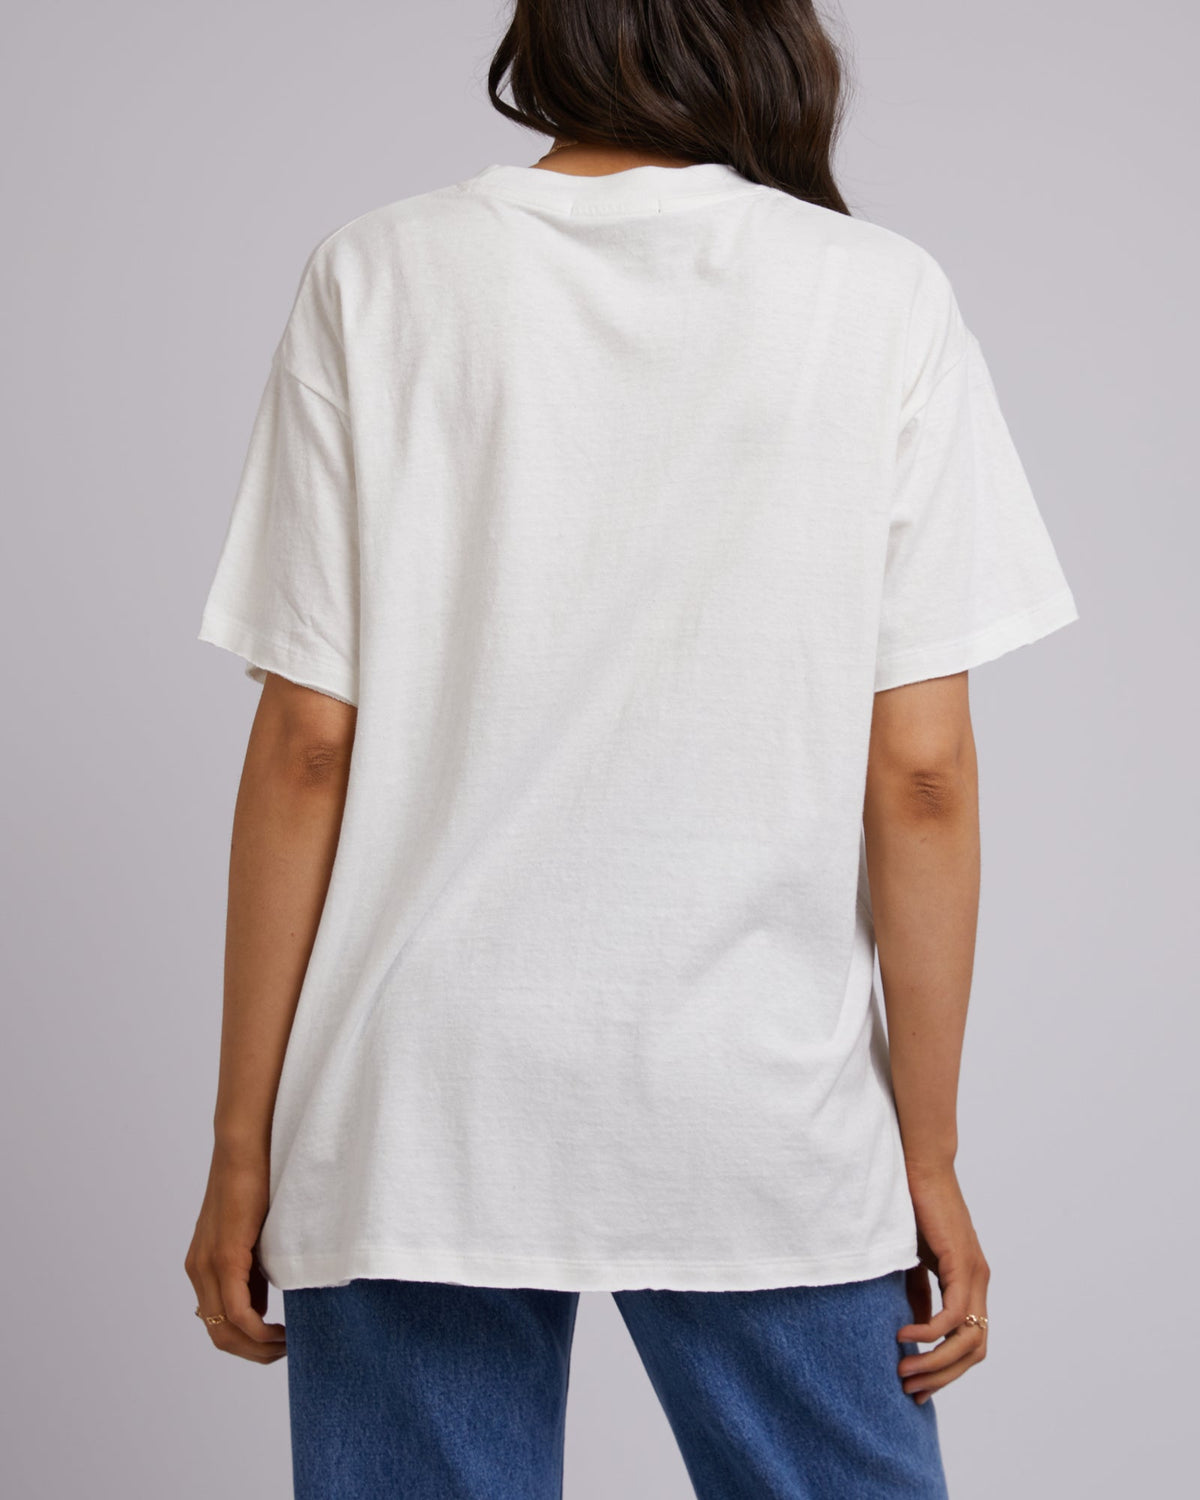 All About Eve-Sundream Oversized Tee Vintage White-Edge Clothing